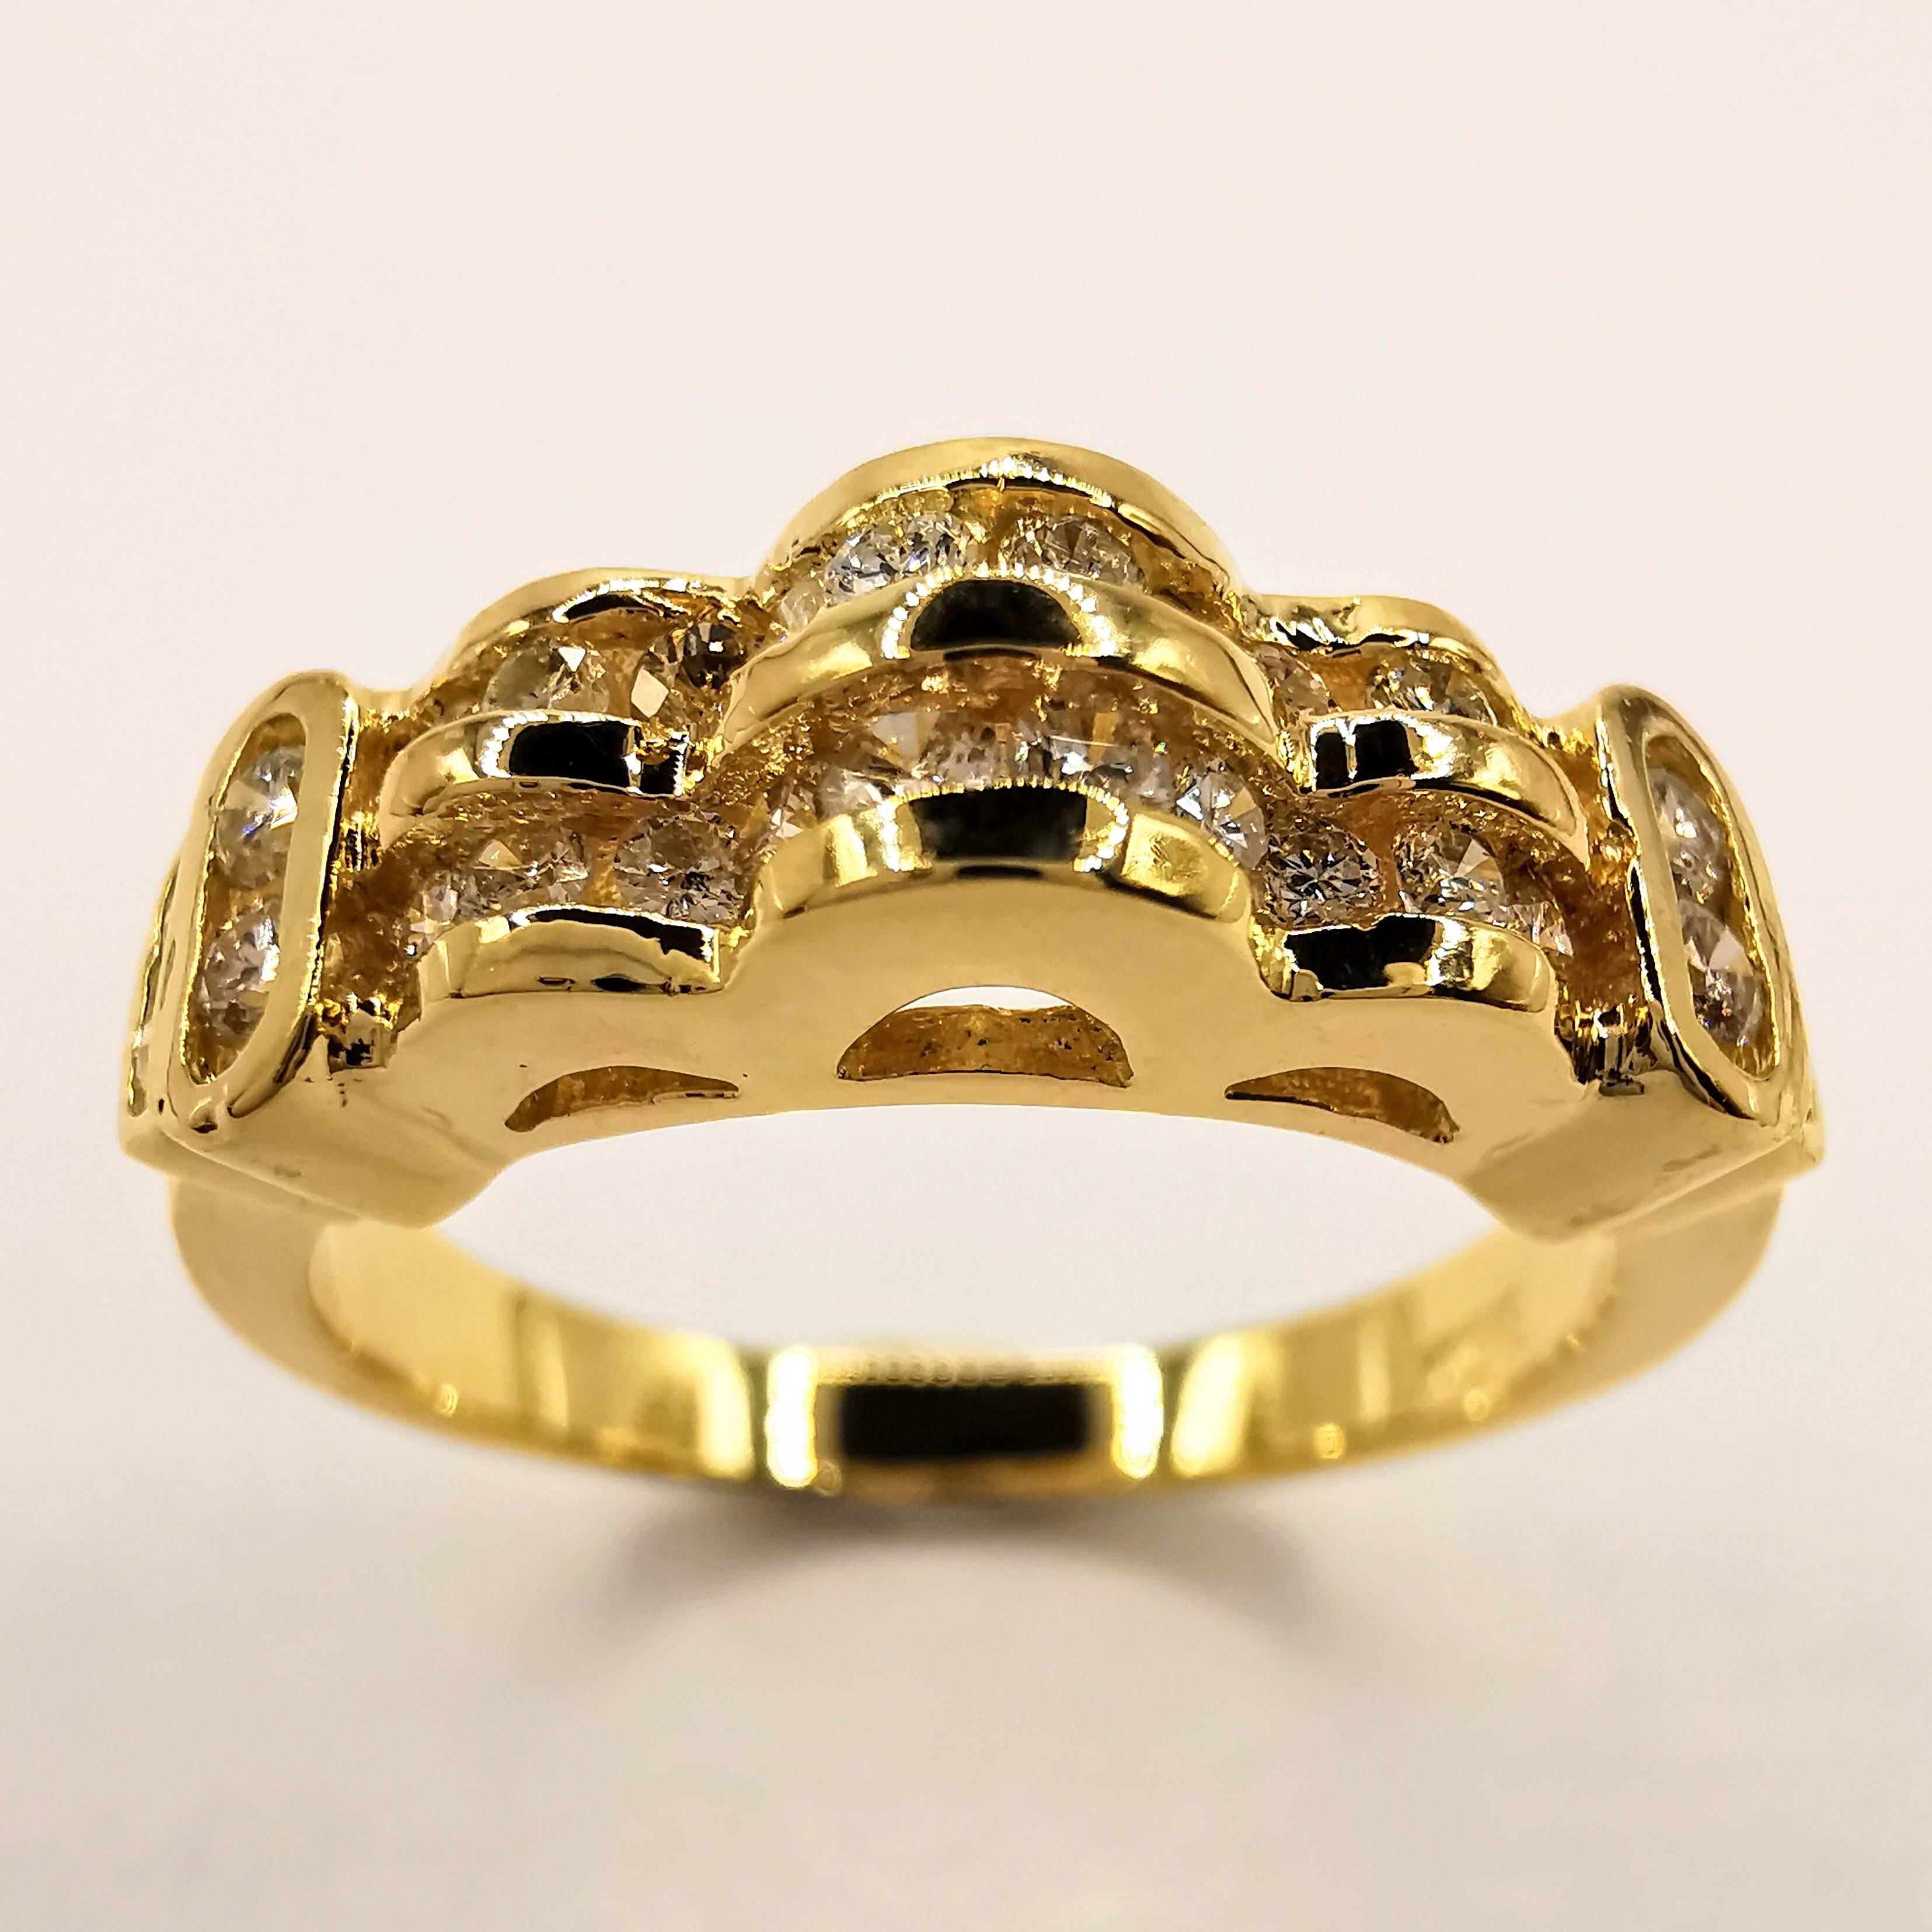 This bold and sparkly channel set diamond bridal/wedding/unisex ring is made of 850 yellow gold, which has a gold purity slightly above 20k. The ring is set with 28 brilliant cut diamonds, totaling 0.52 carats, and has a total weight of 4.8 grams.